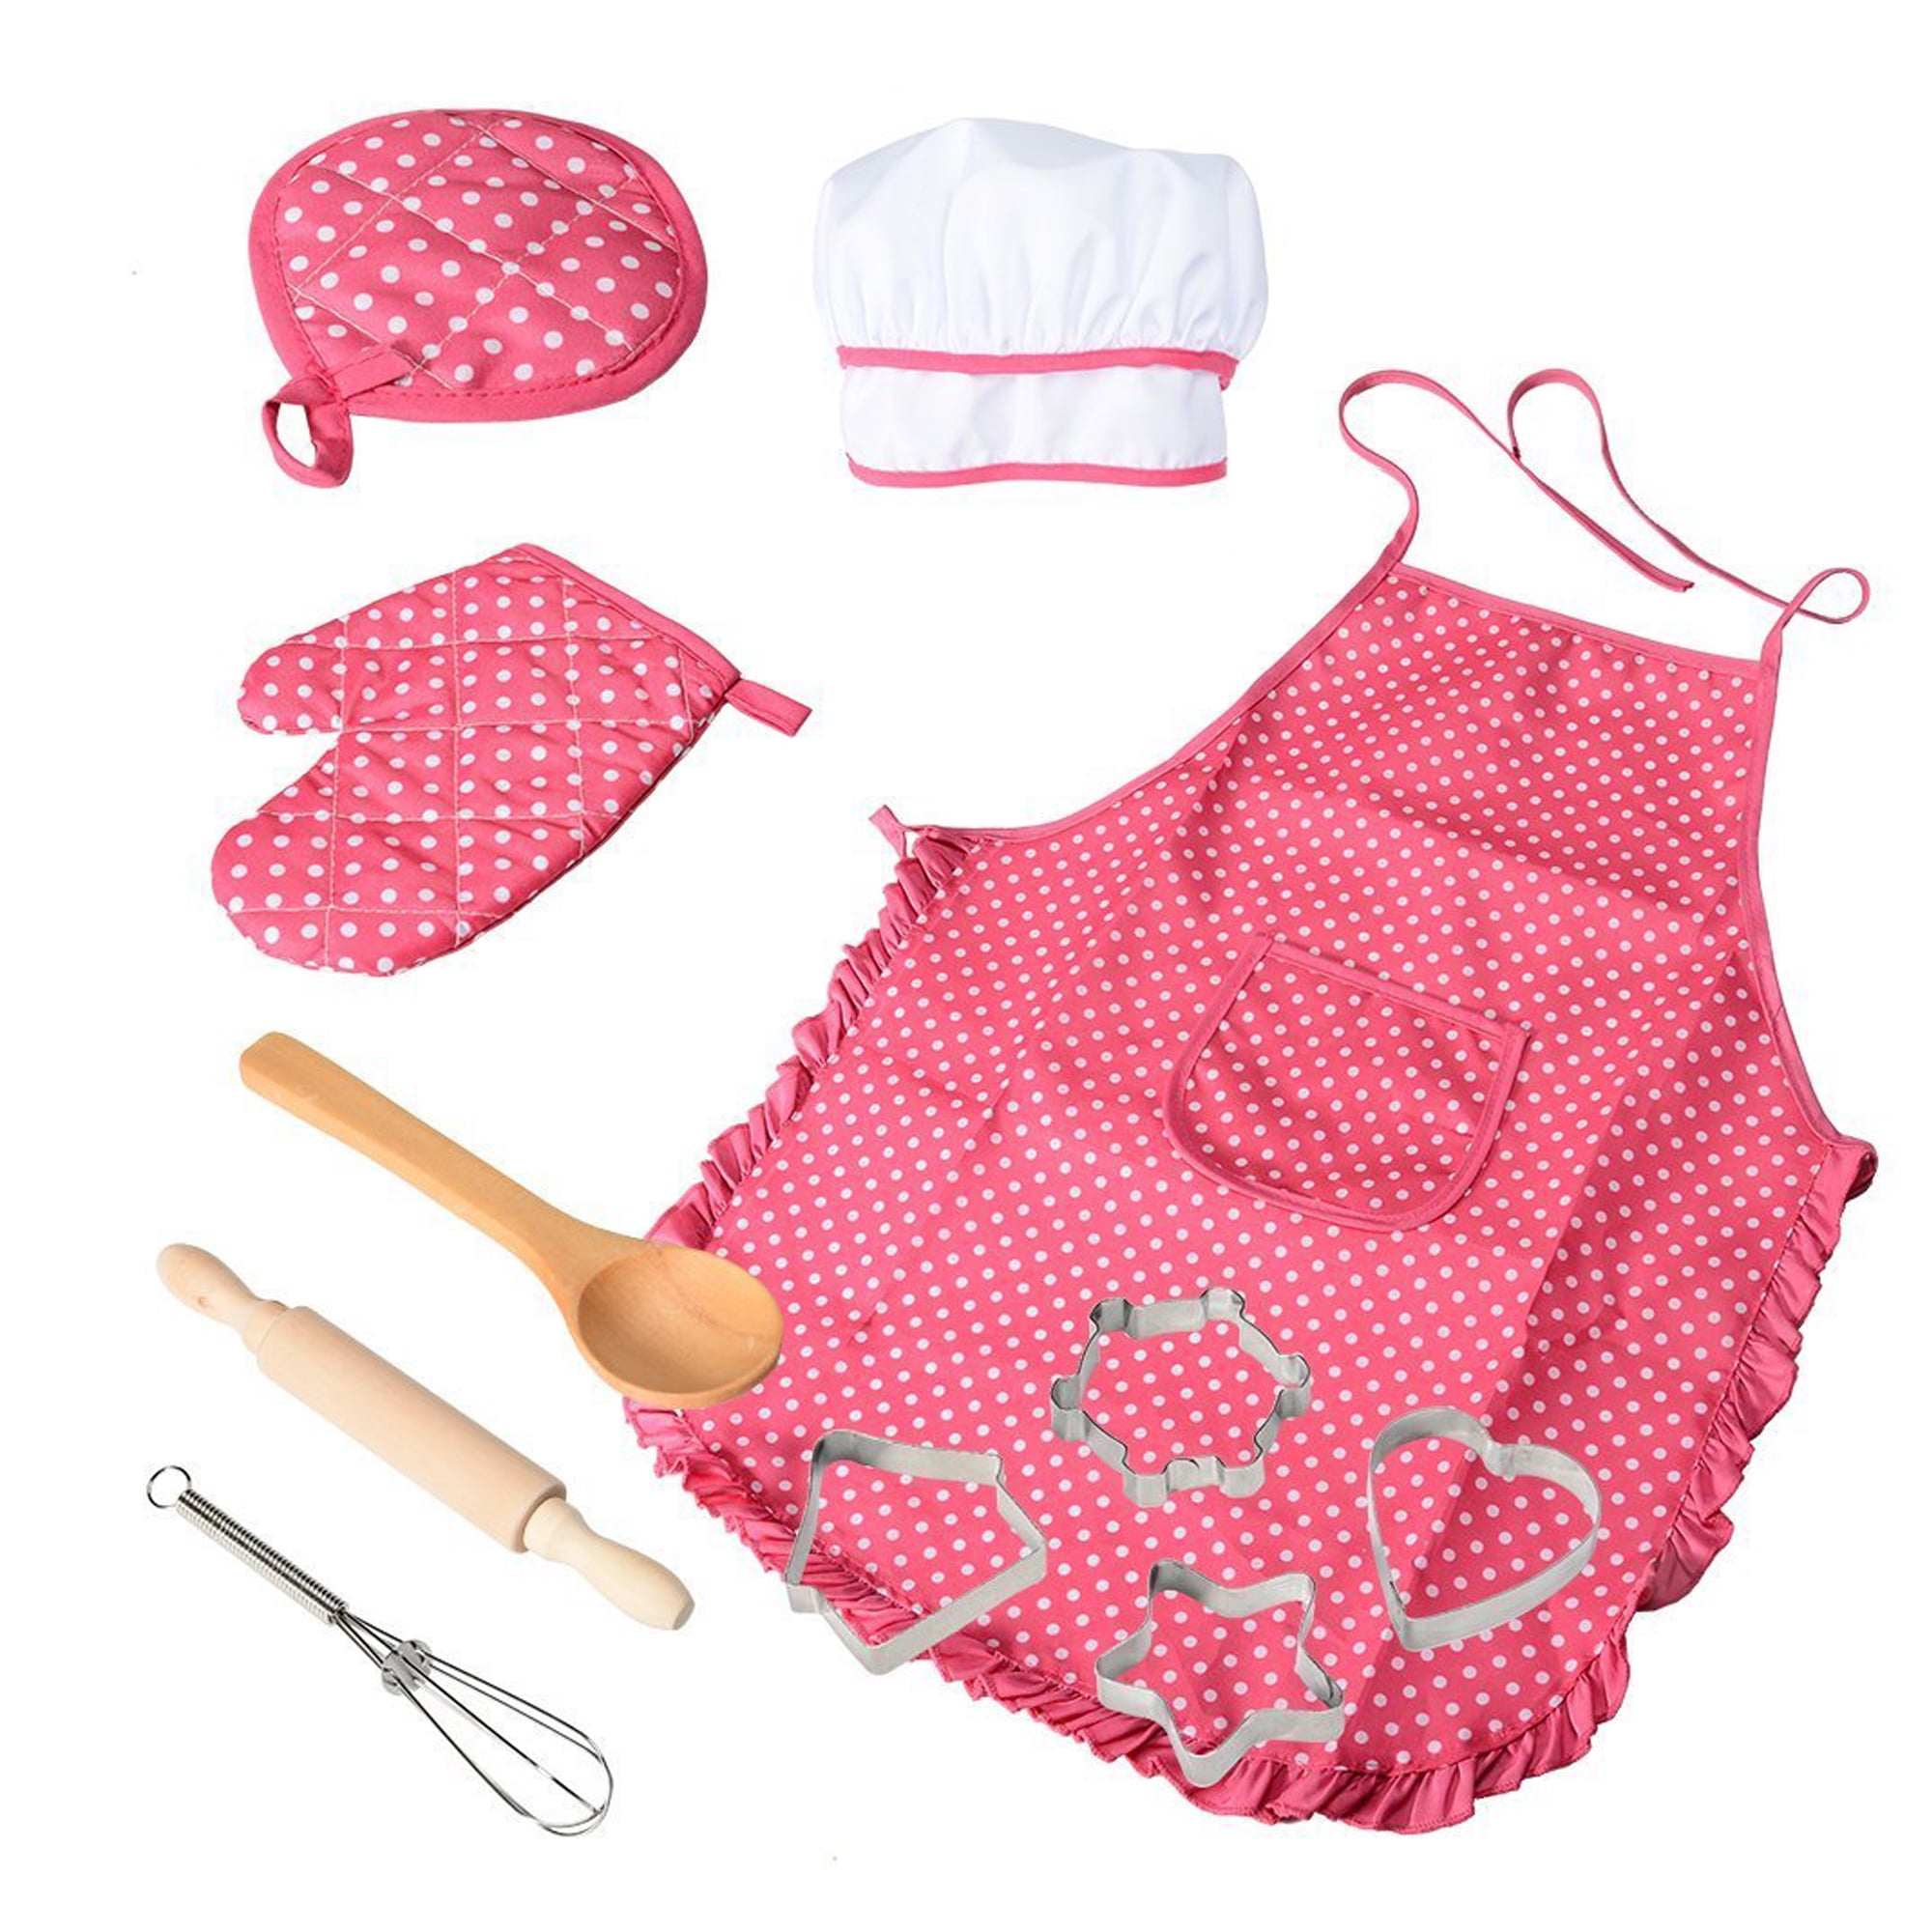 Kitchen Set Apron Glove Cap Cake Molds Whisk Tool Kits Kid Chef Cooking Food Toy 